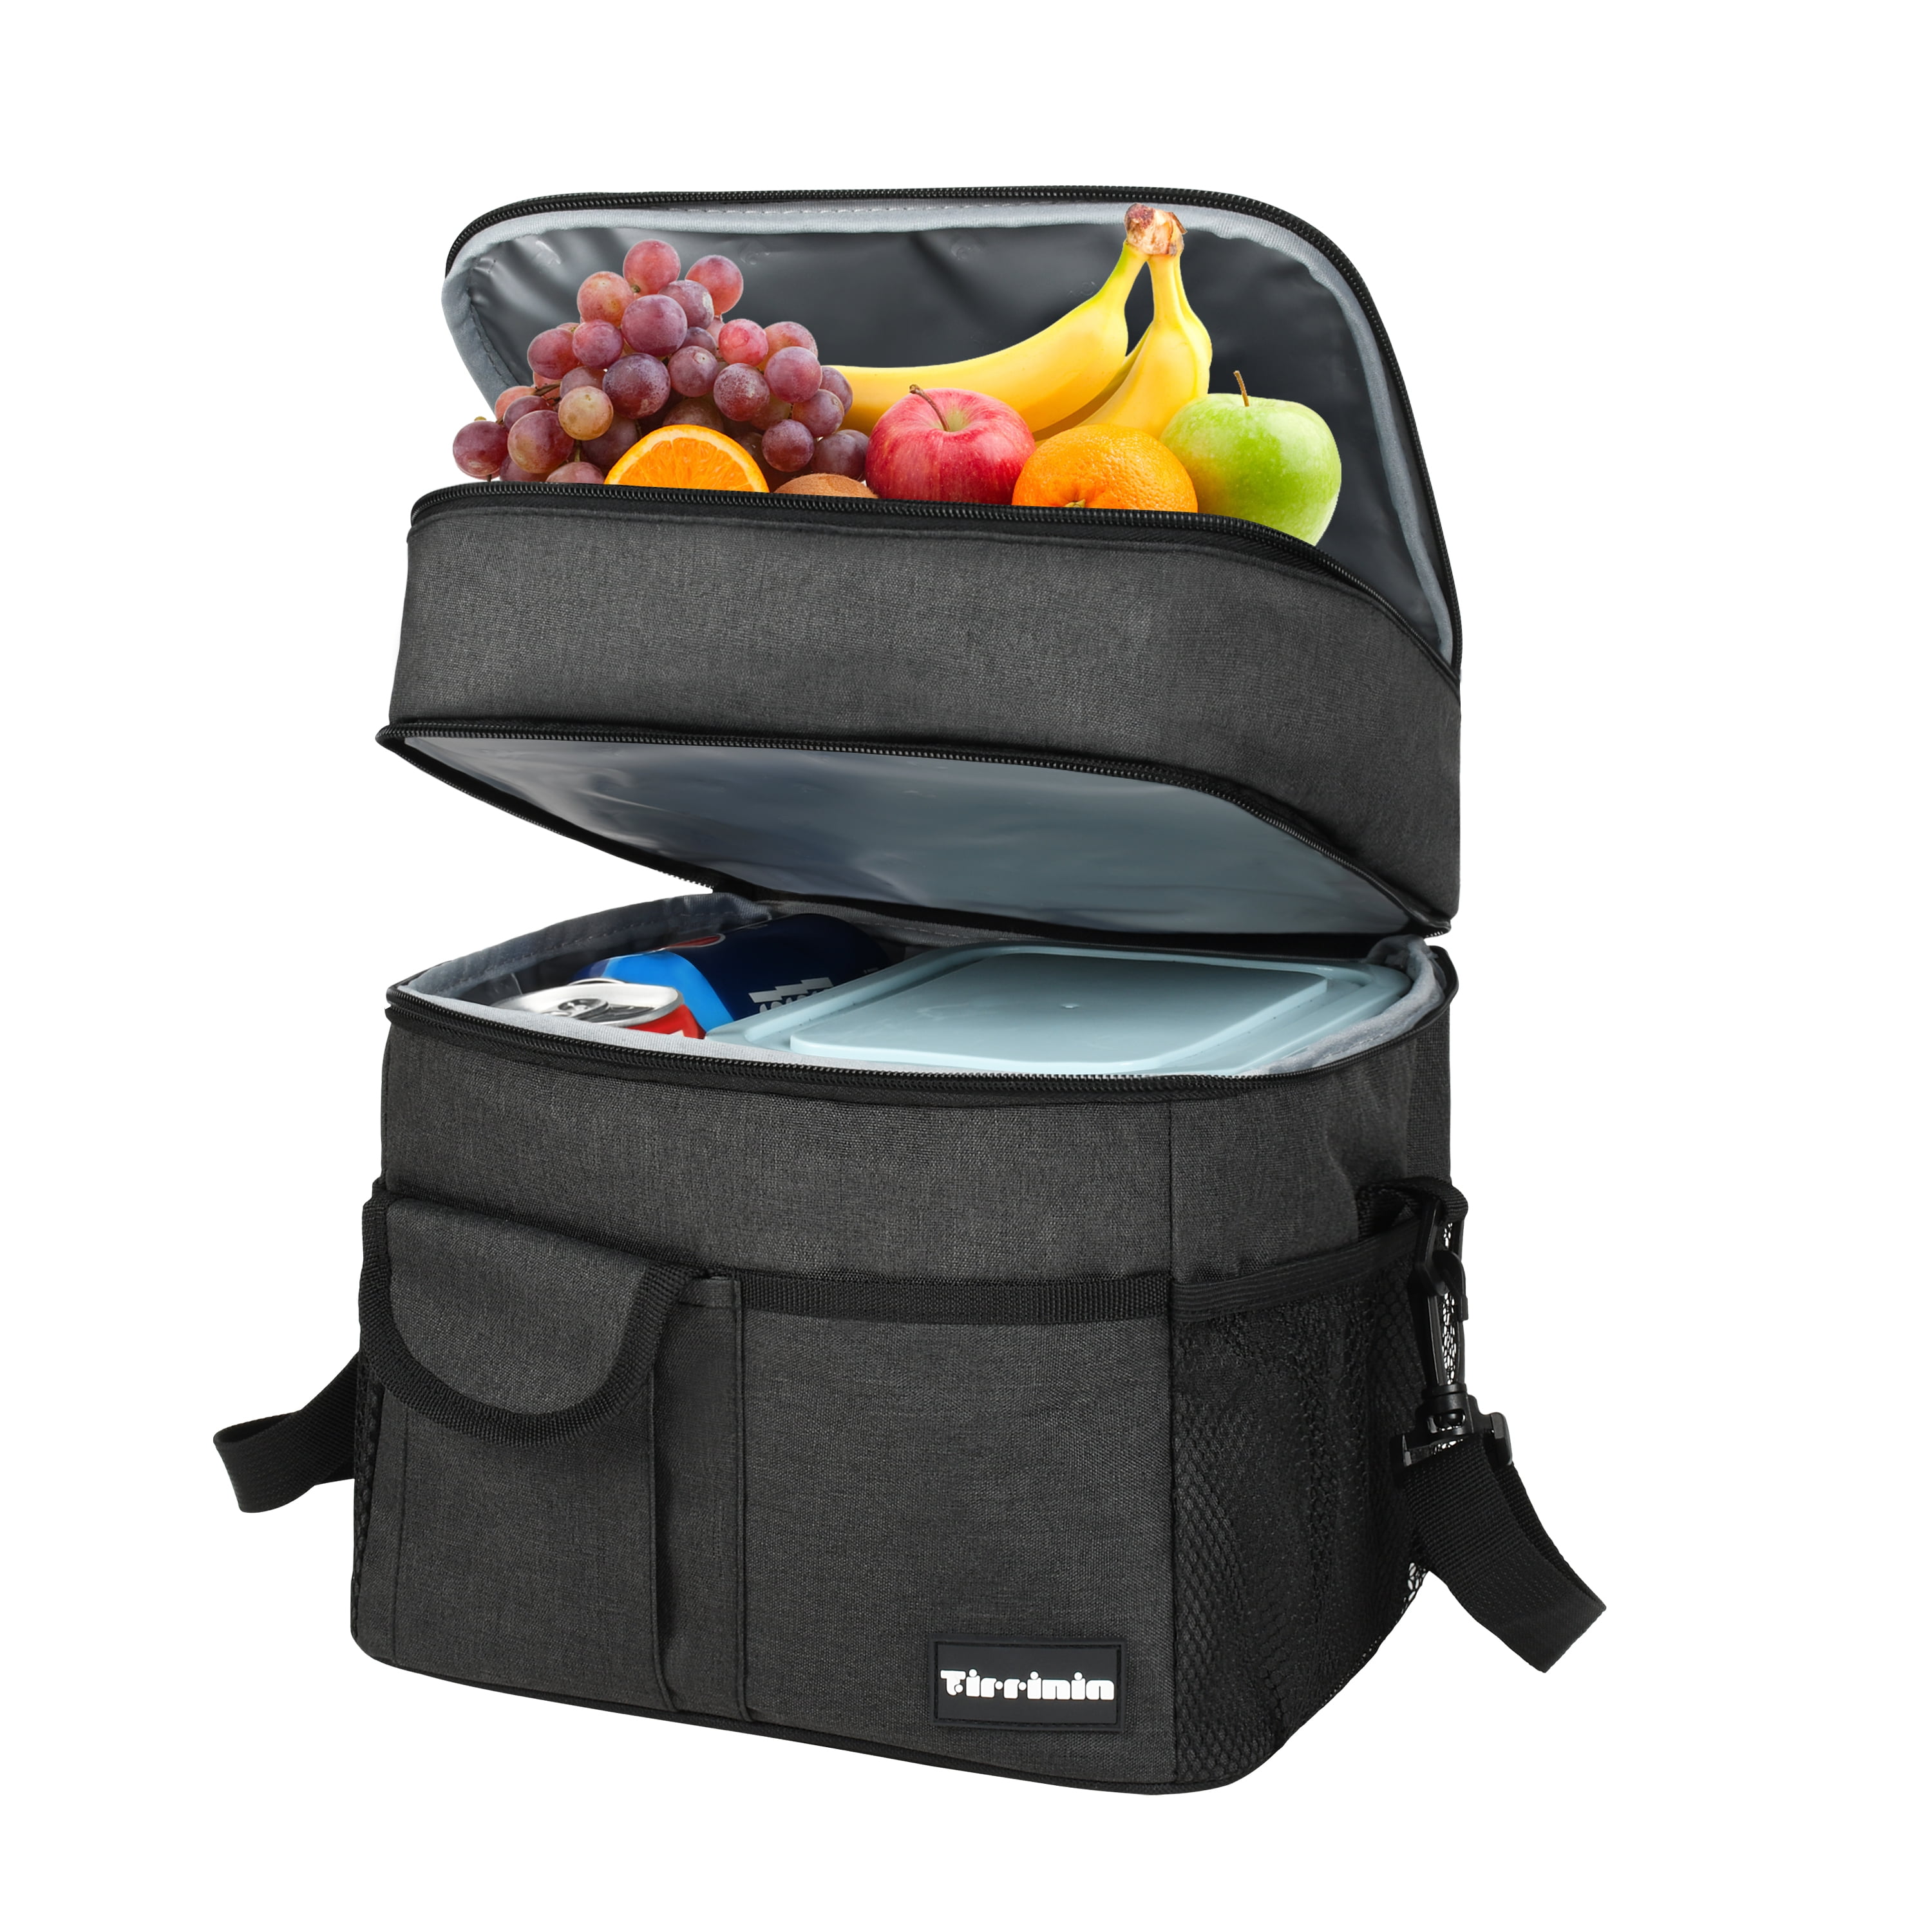 Lava Lunch️ Lunch Box Insulated Lunch Bag, Large Heated & Cooled Double  Deck Lunch Box for Men, Women, & Kids (Black)